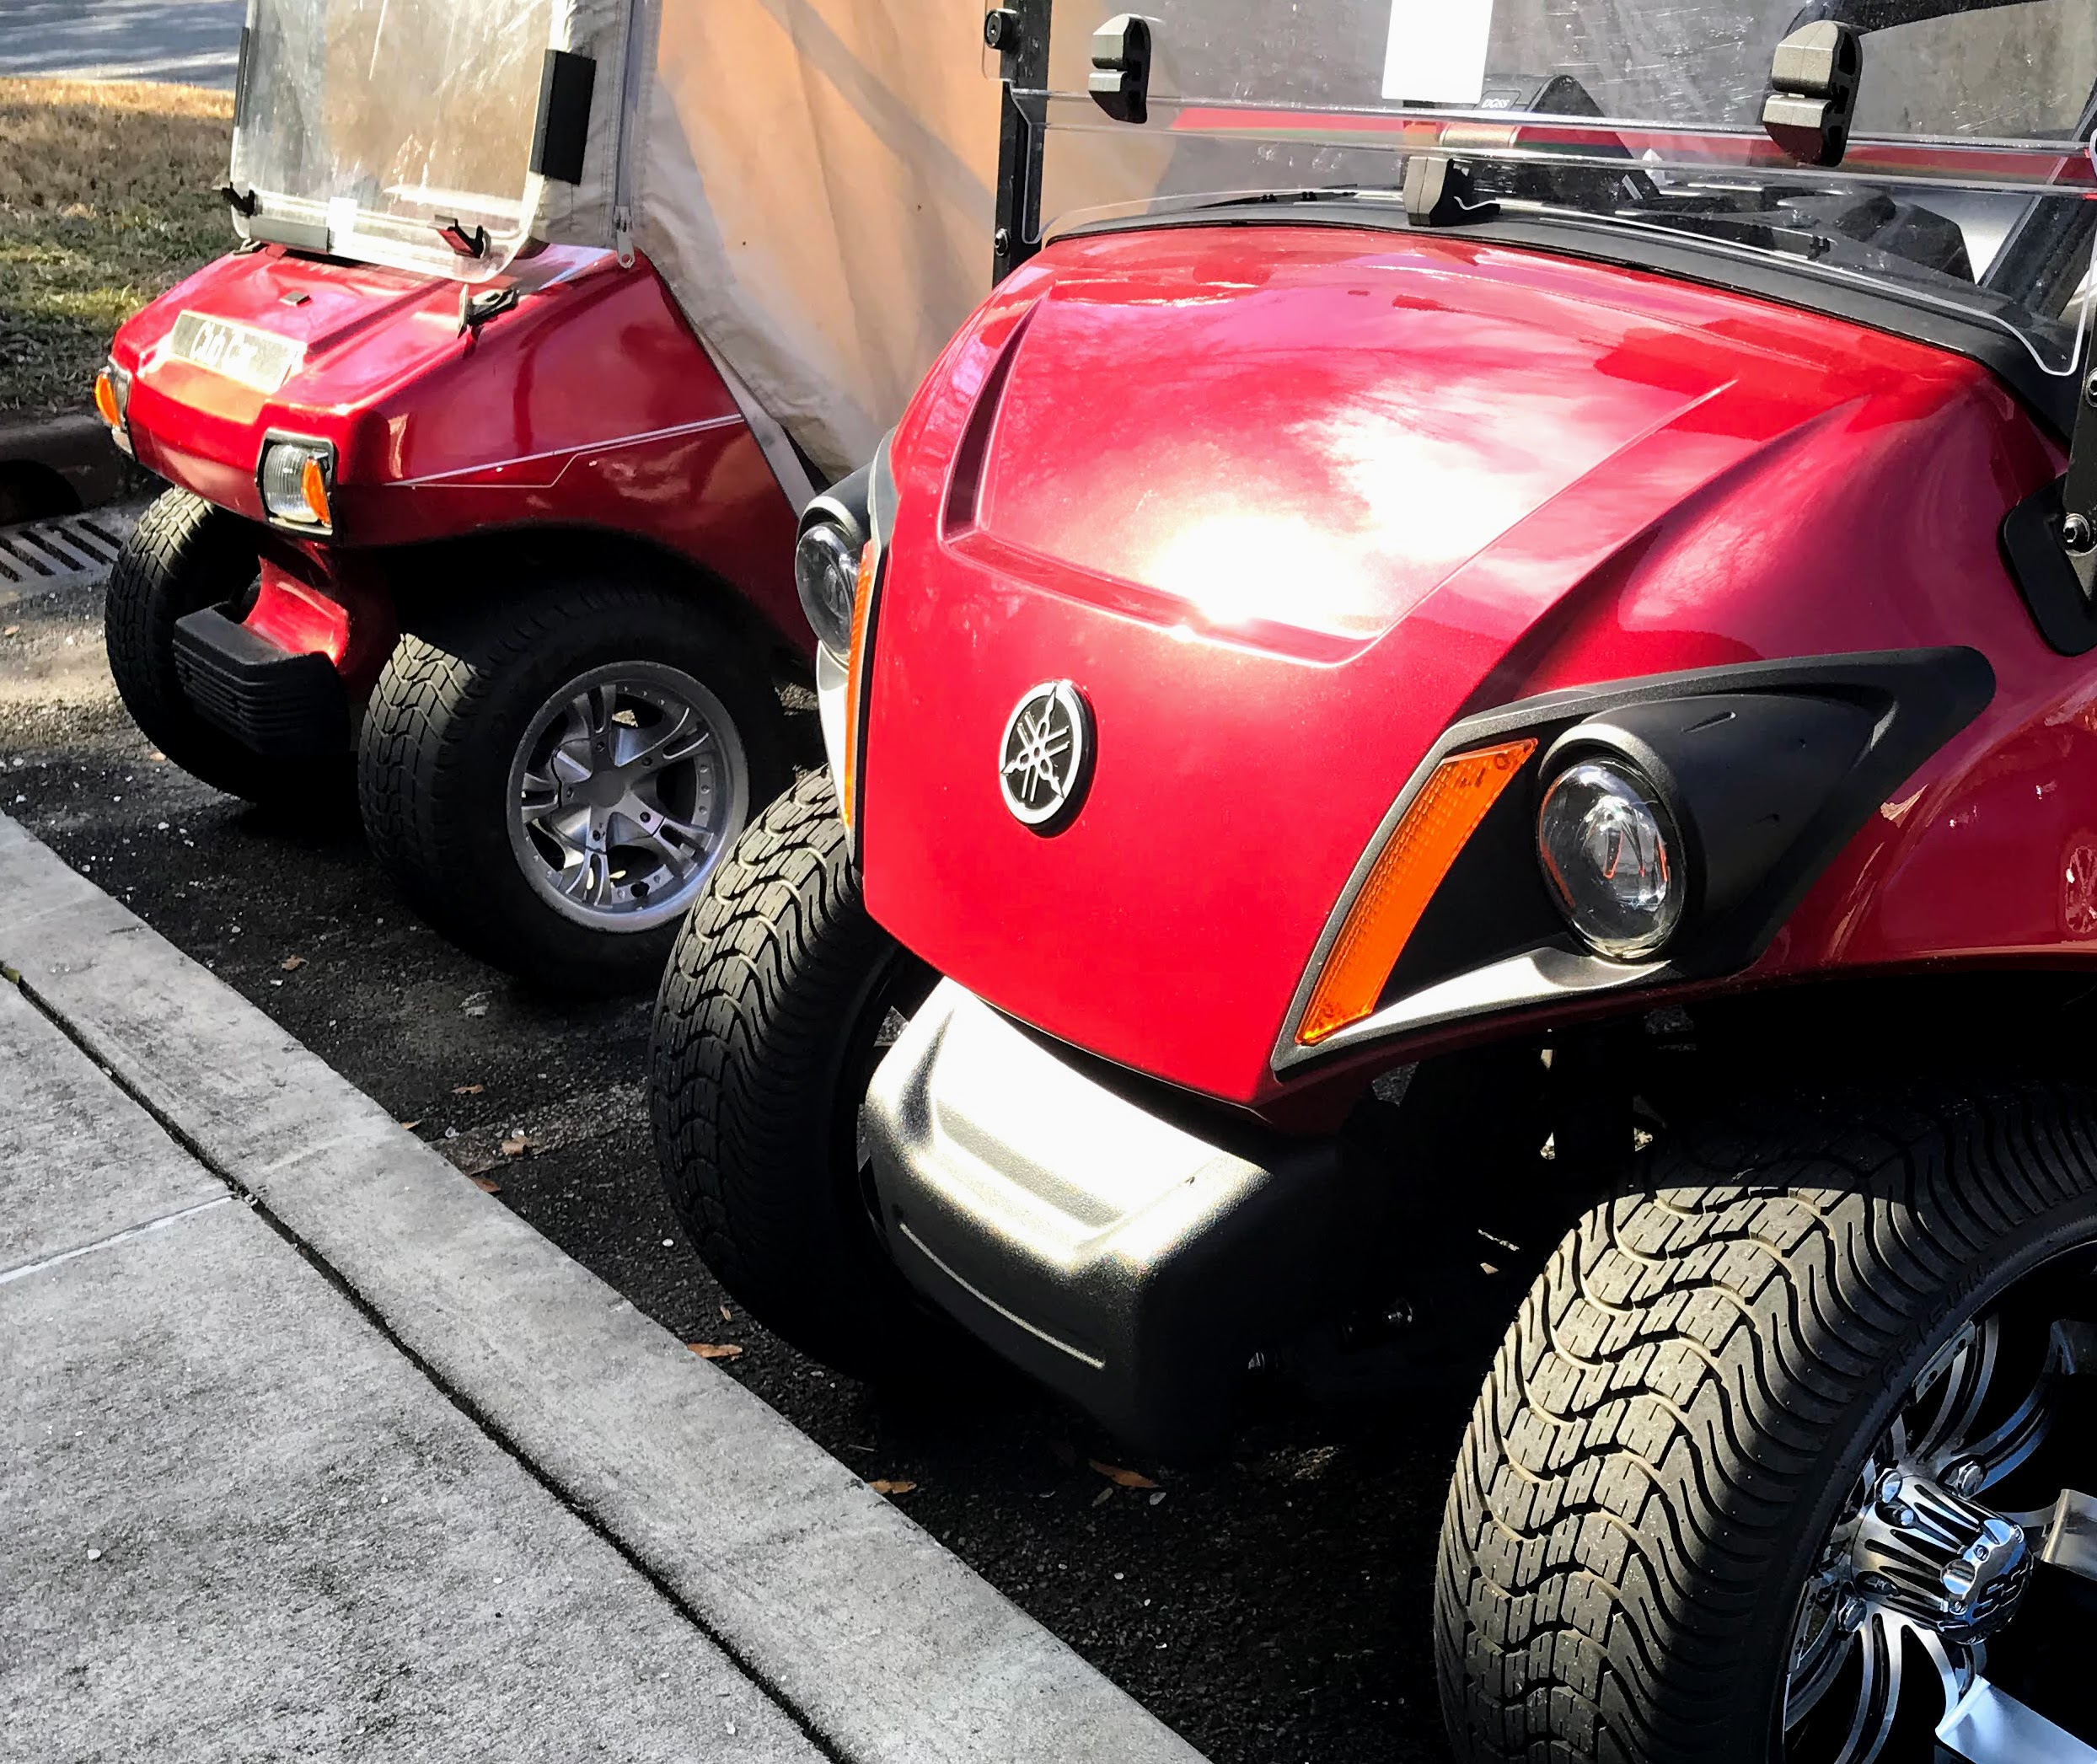 club ds and ez go red golf carts